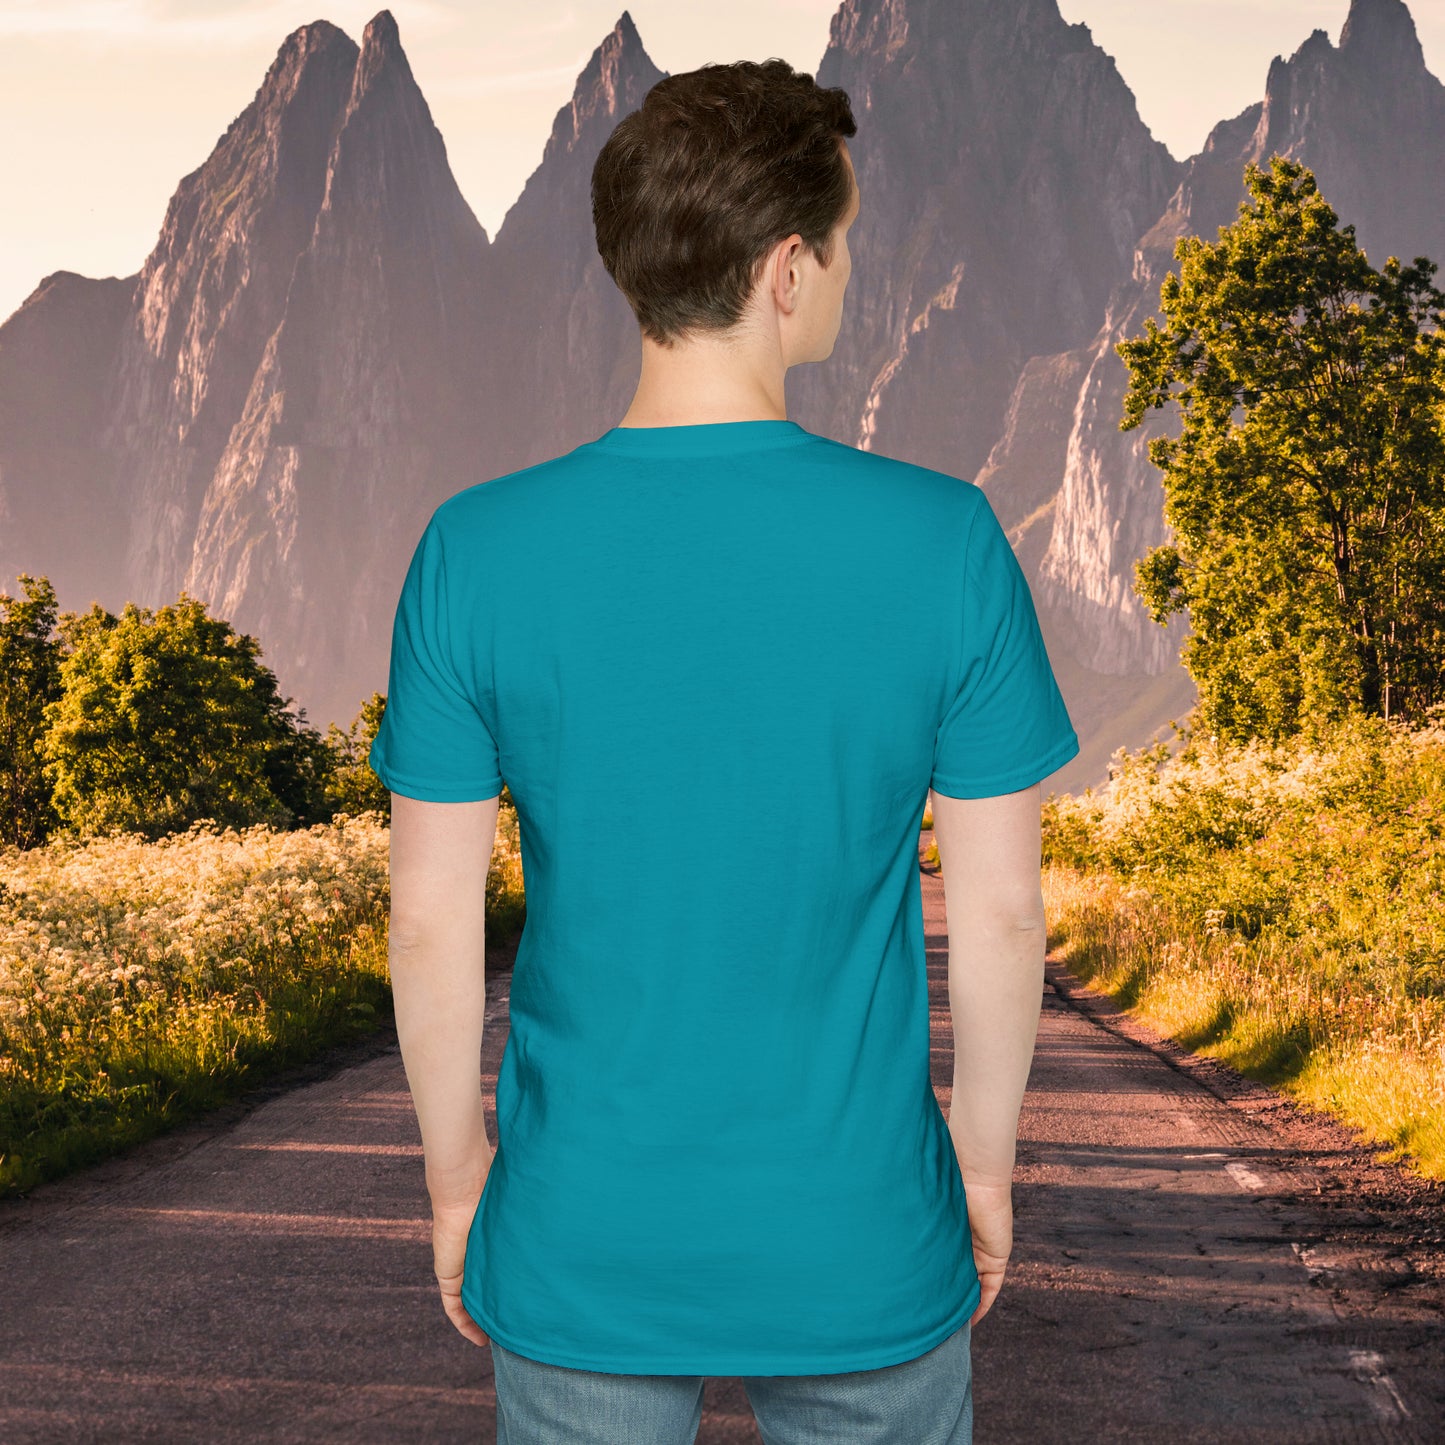 Great shirt for that hiker who just loves to be outdoors to climb mountains or be one with nature on this Unisex Softstyle T-Shirt.